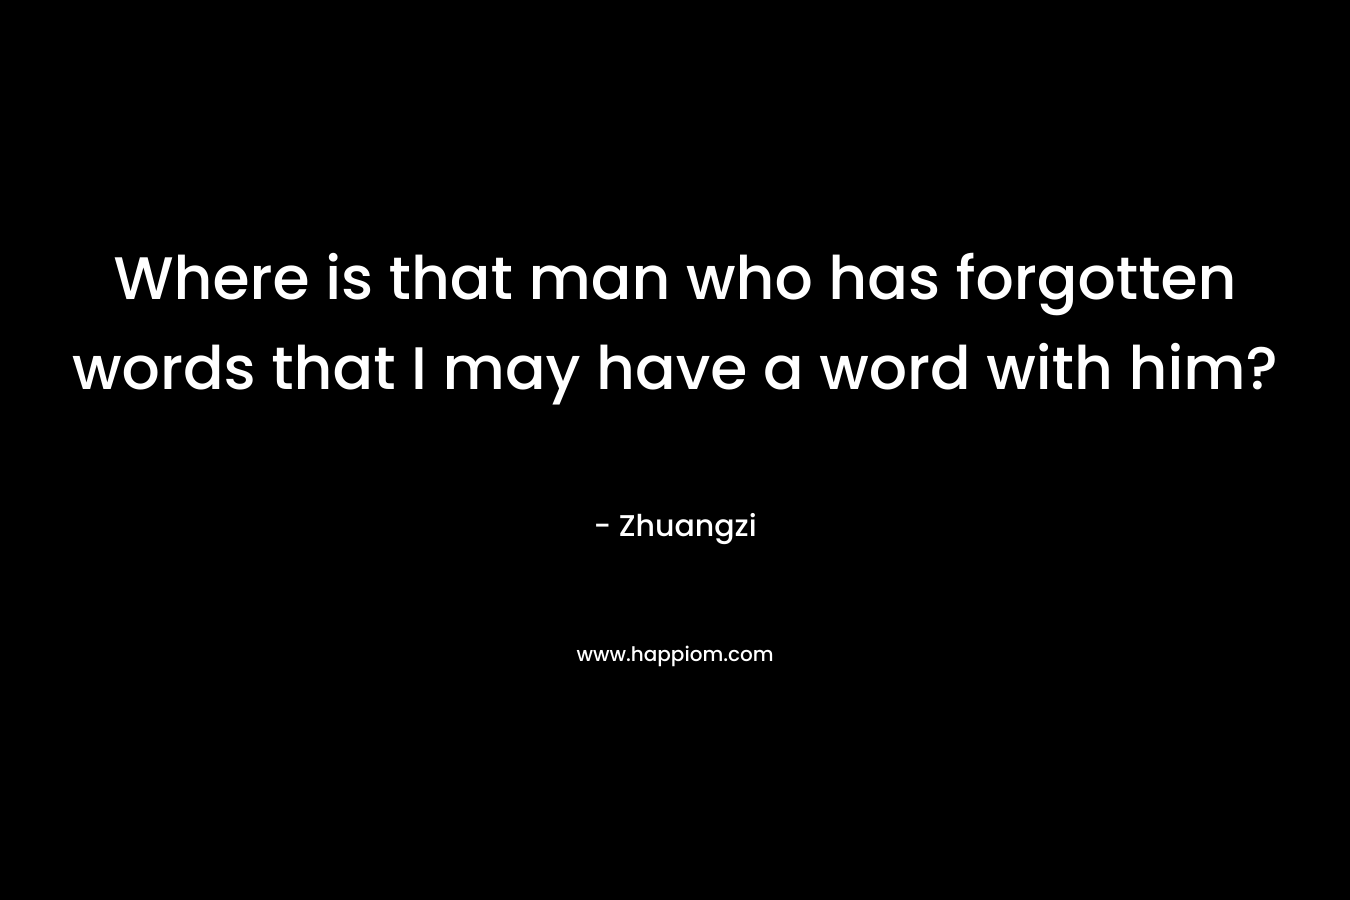 Where is that man who has forgotten words that I may have a word with him? – Zhuangzi